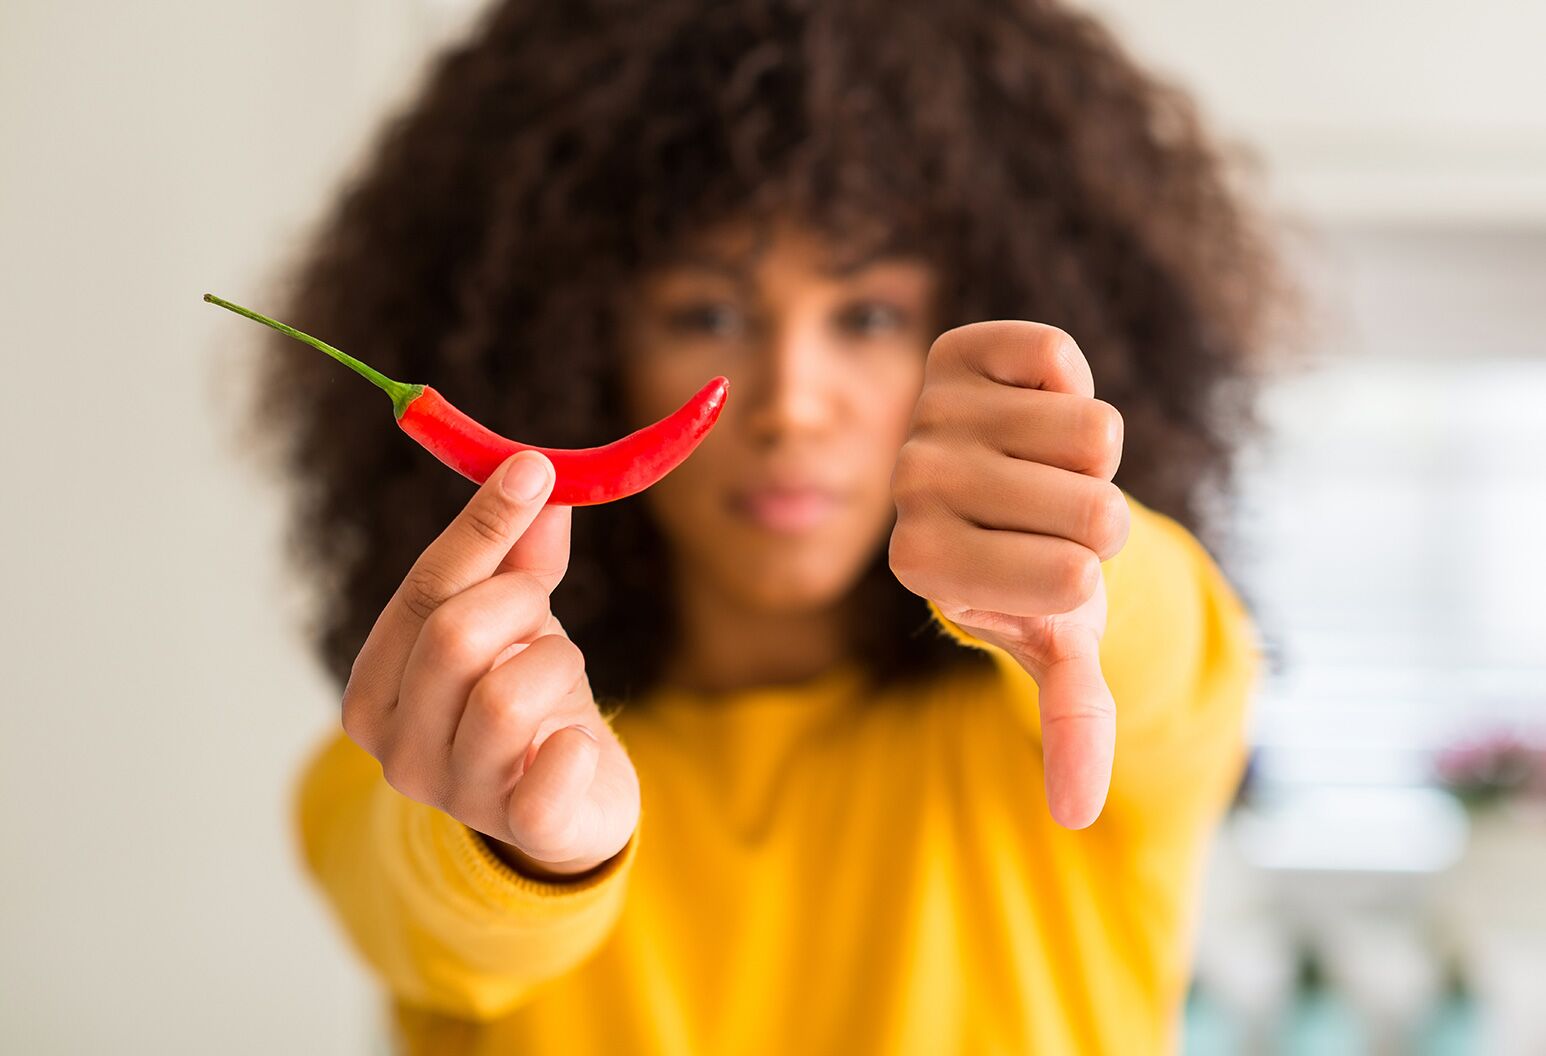 A woman in an orange sweater holding a red pepper with one hand and giving a thumbs down with the other.